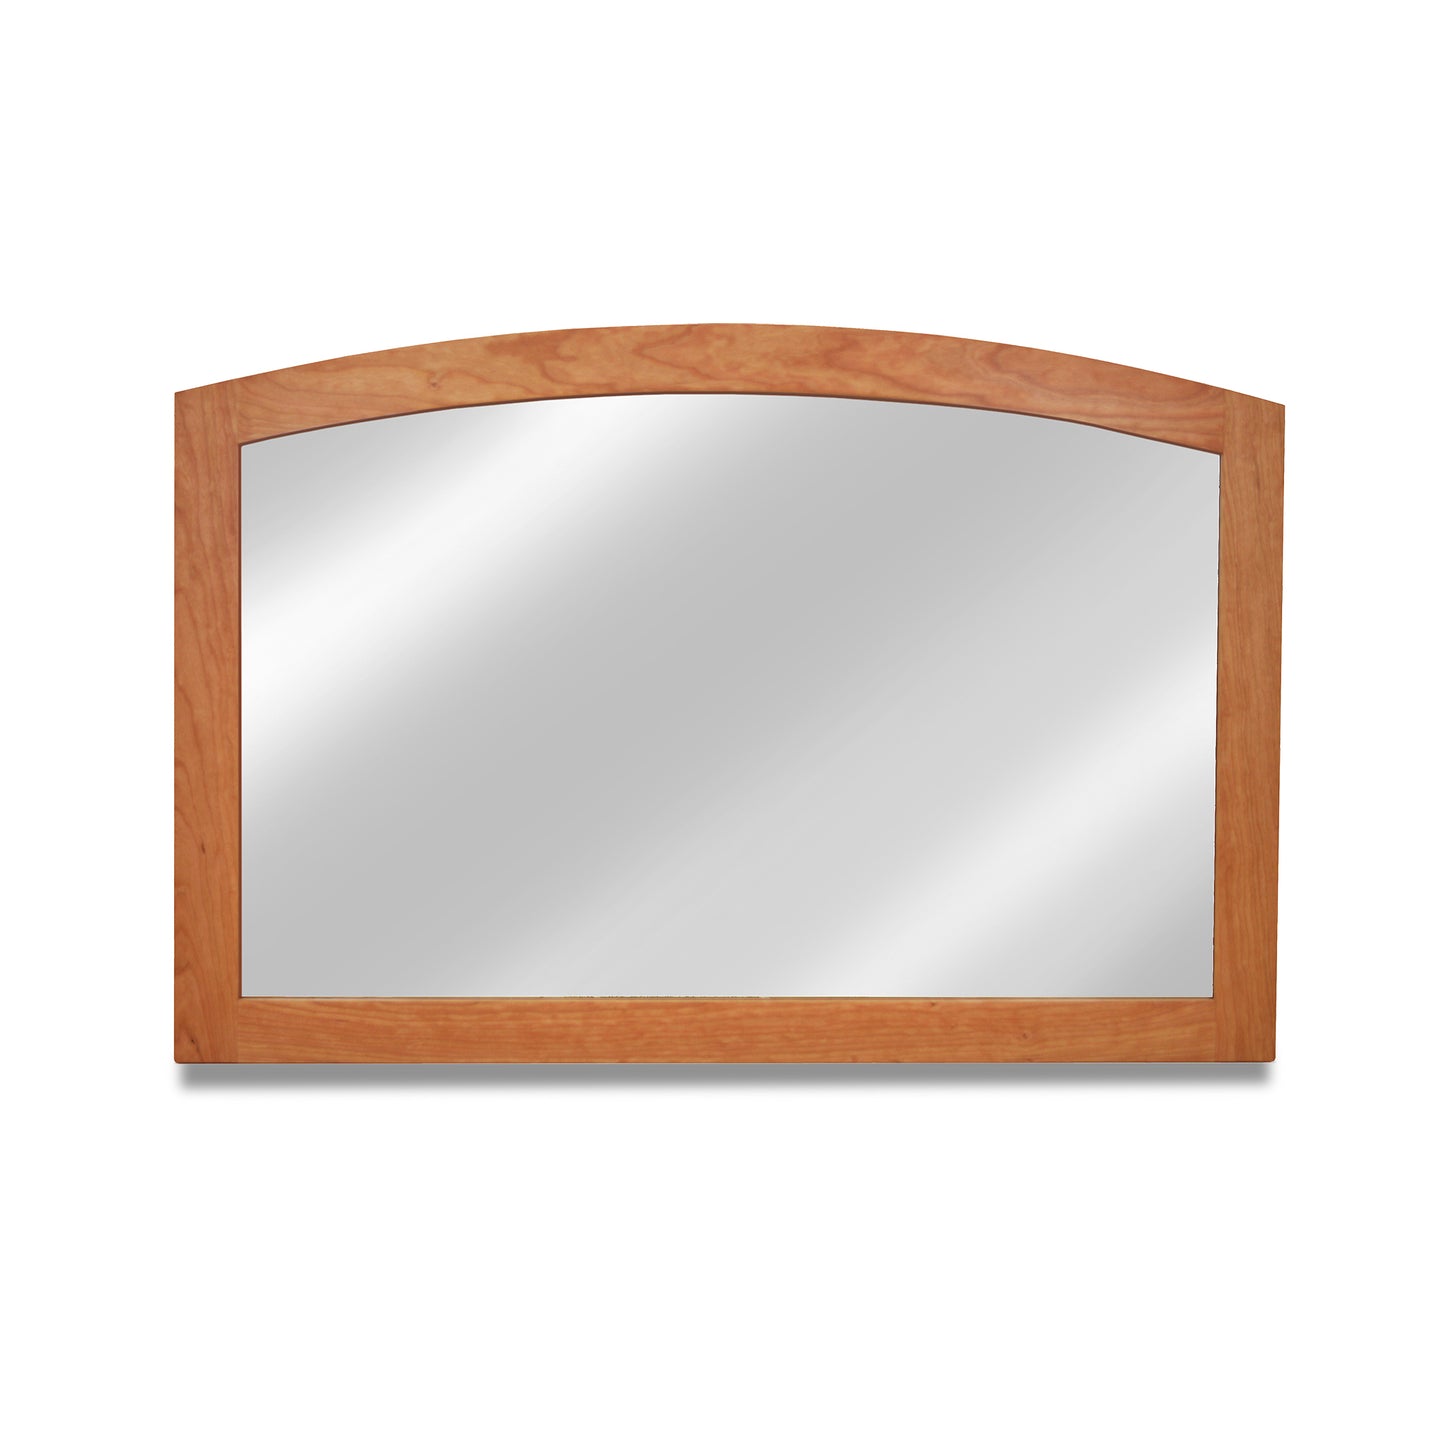 A sustainably harvested Maple Corner Woodworks American Shaker Arched Mirror isolated on a white background.